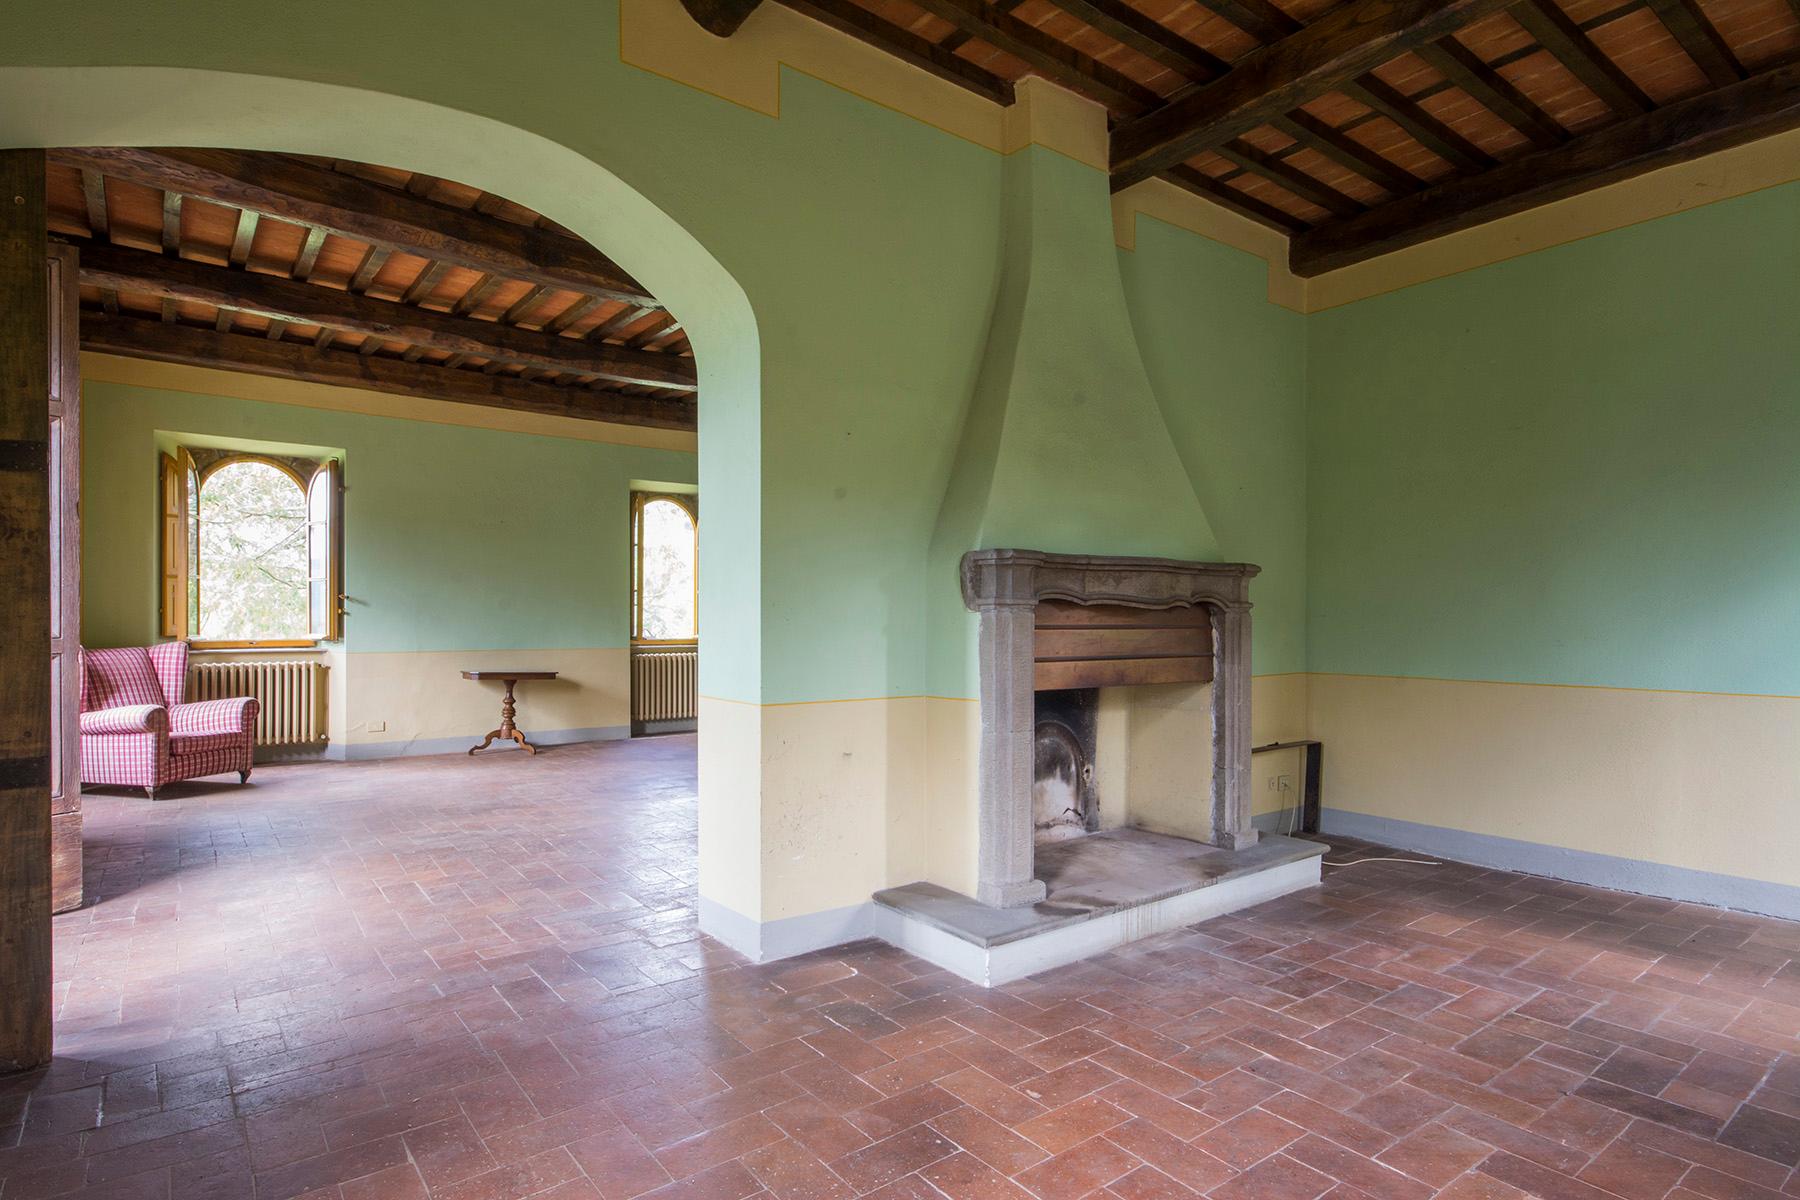 Stunning villa with breathtaking views of the Lucca countryside - 6